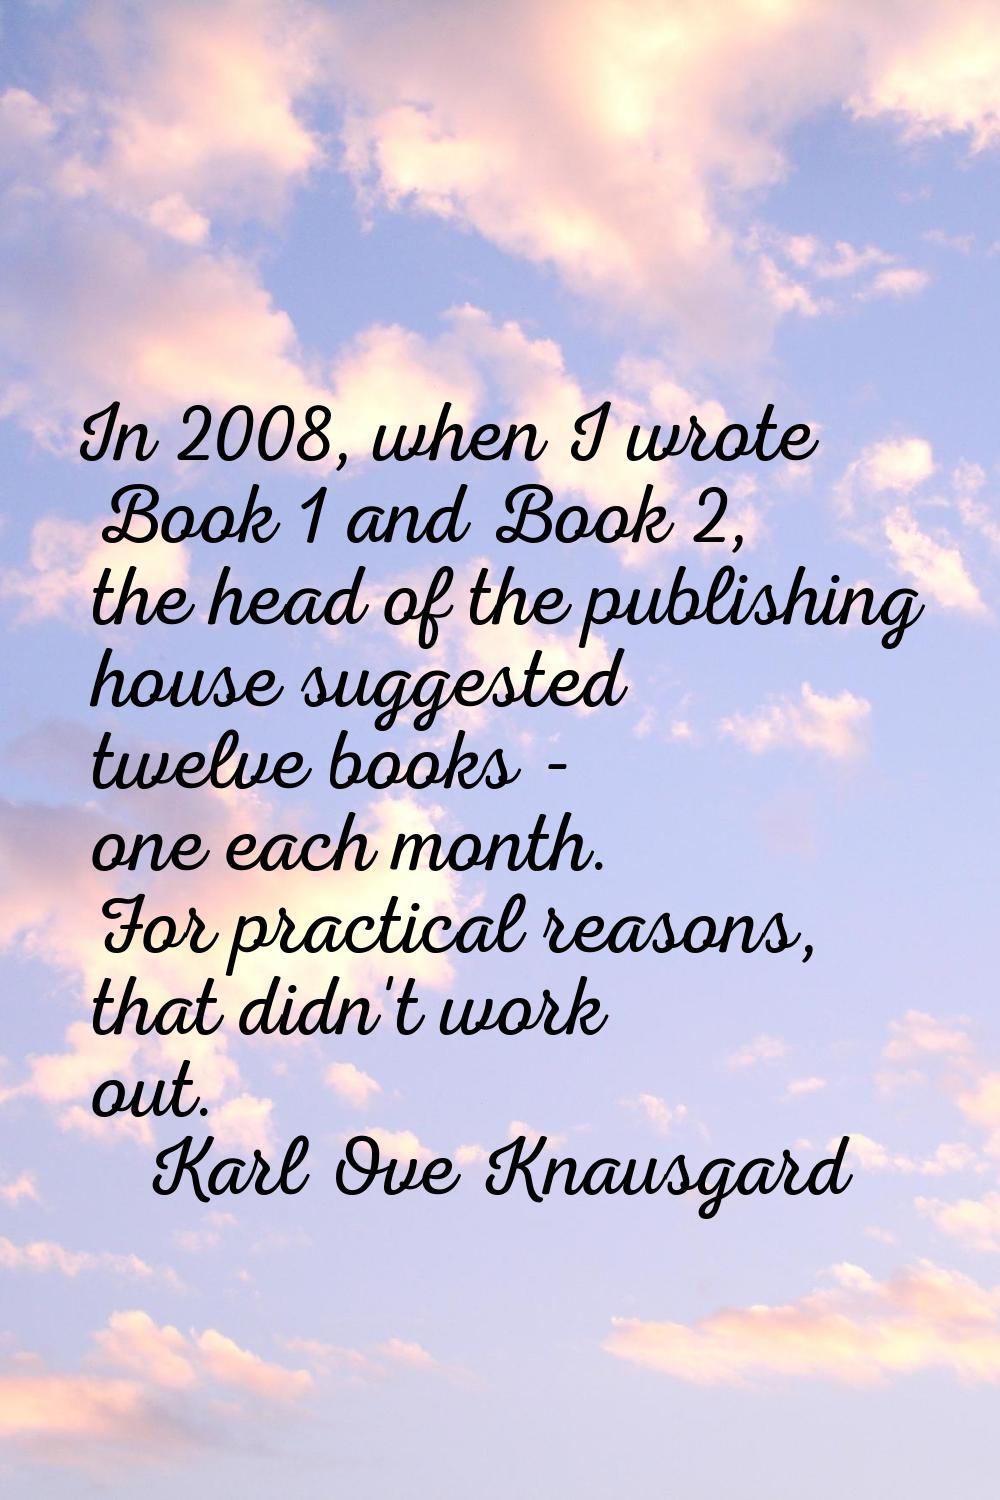 In 2008, when I wrote Book 1 and Book 2, the head of the publishing house suggested twelve books - 